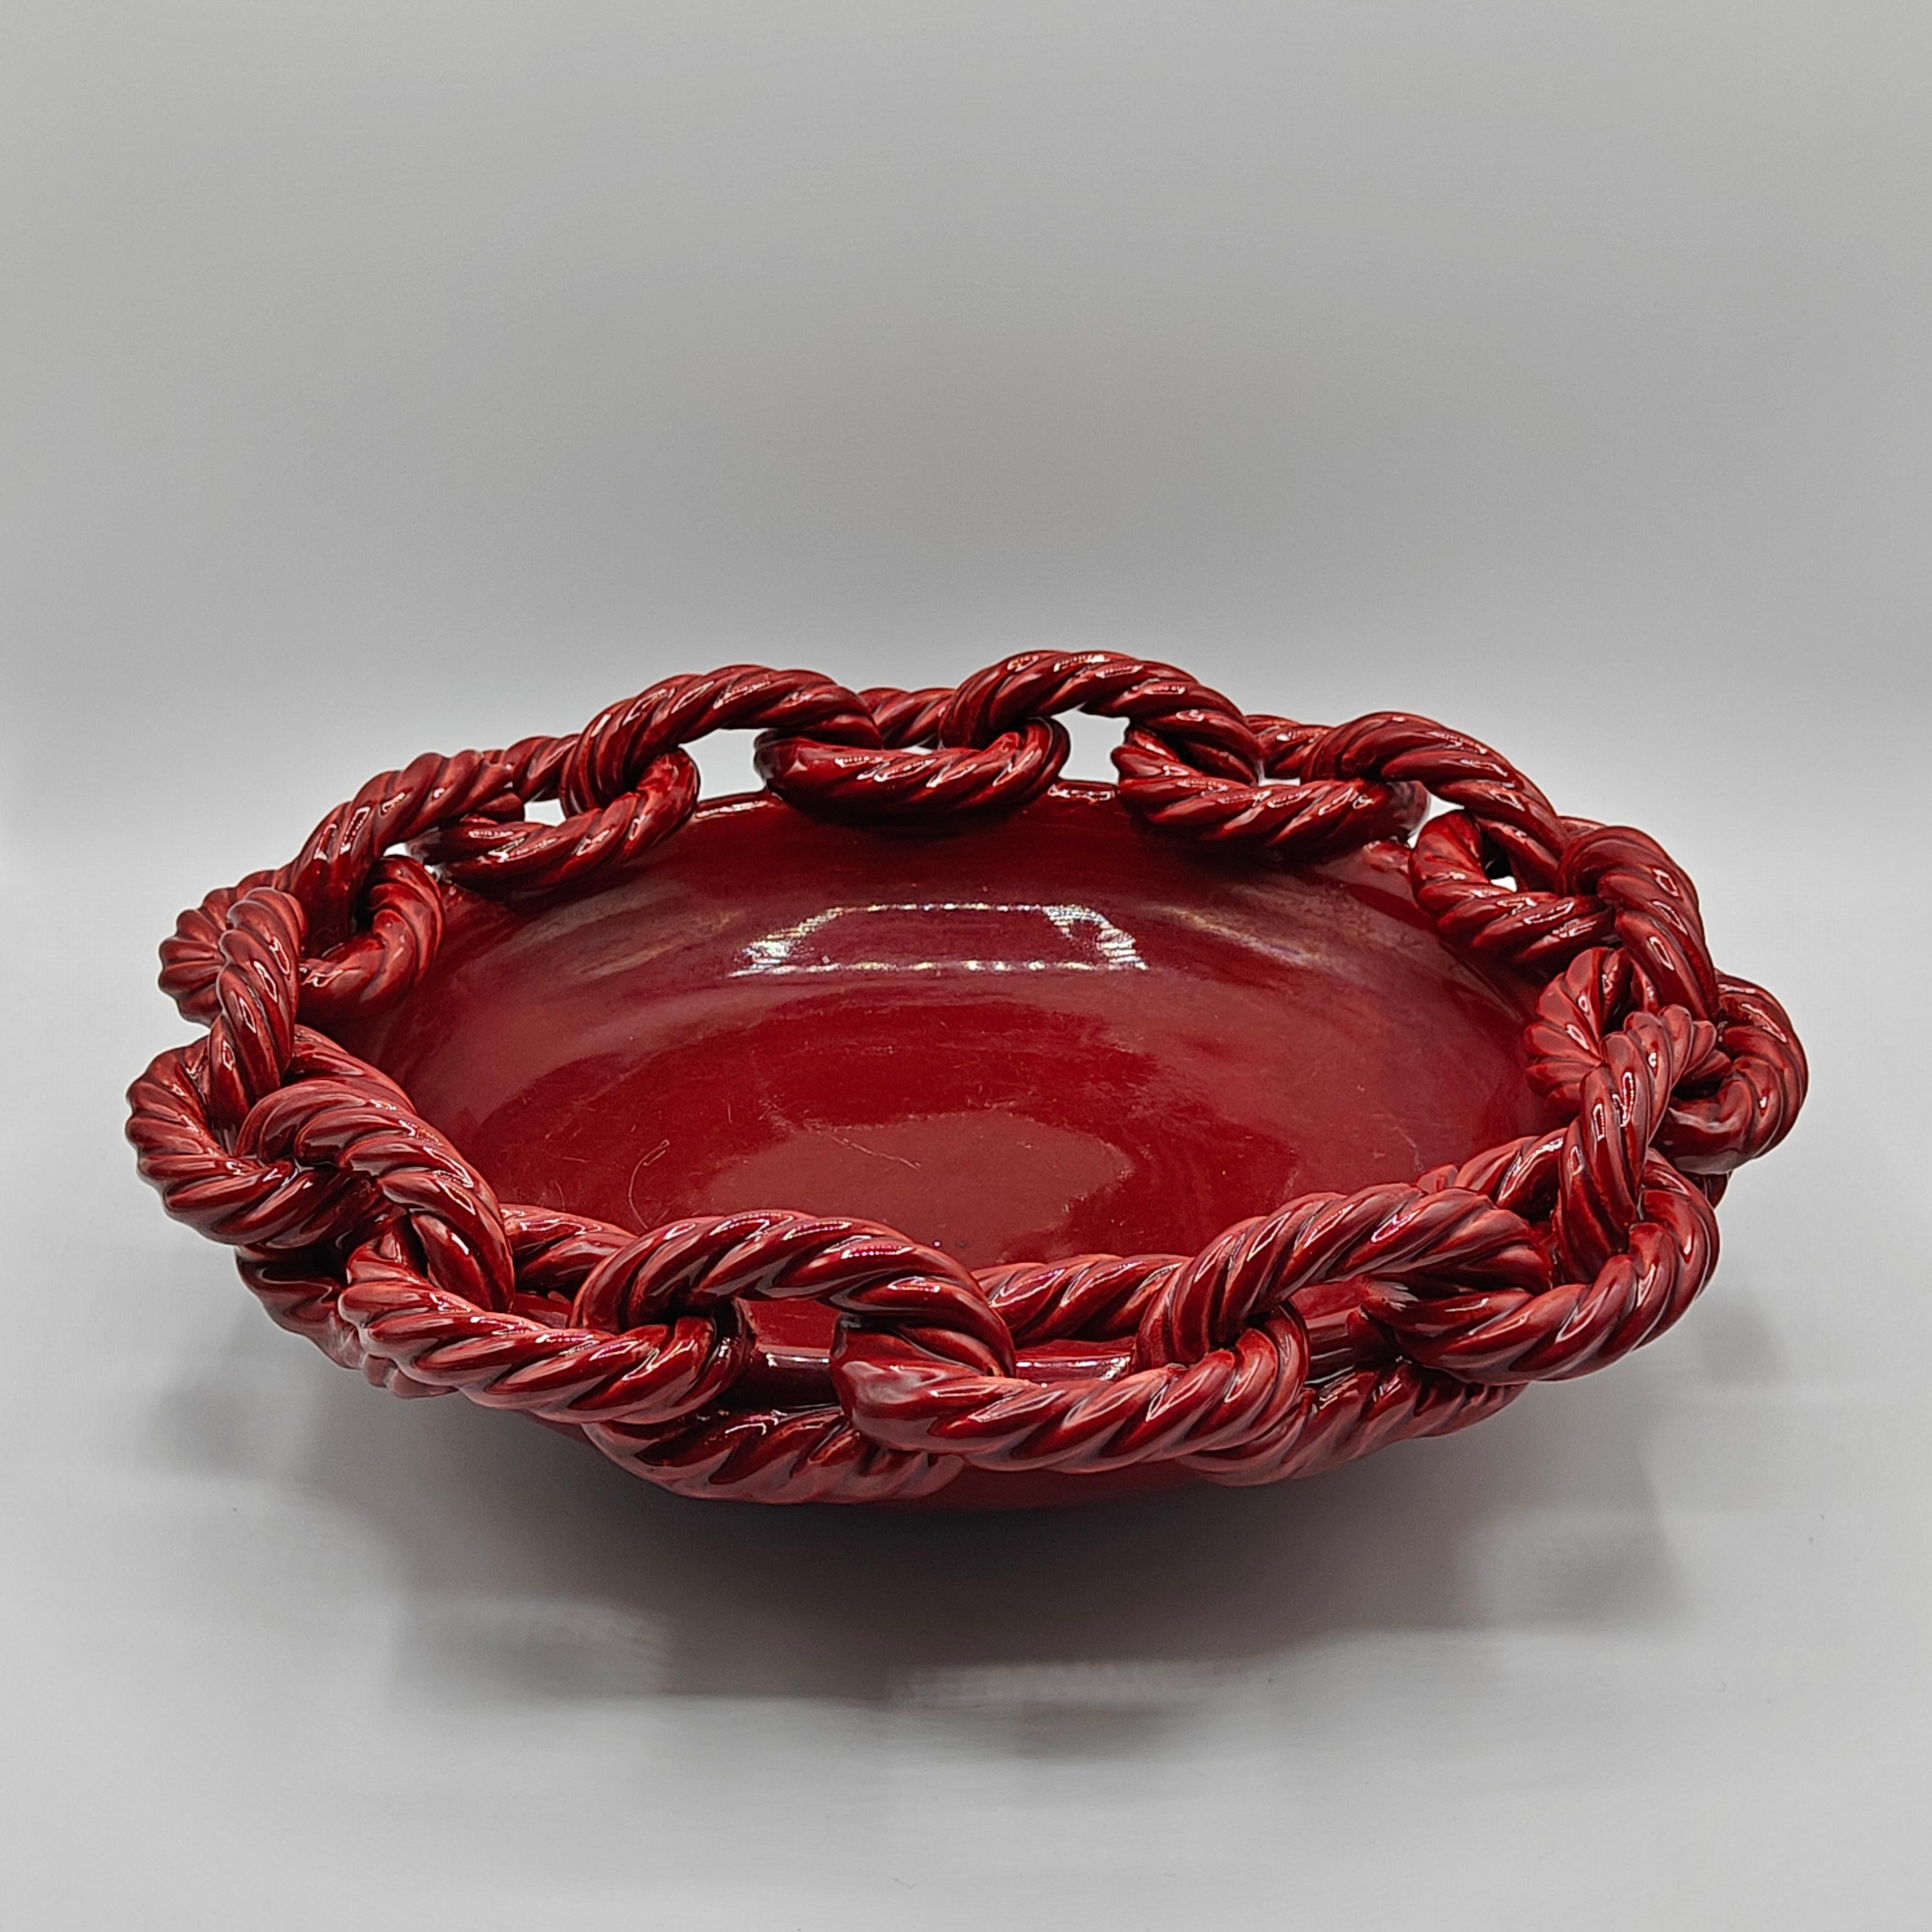 This ceramic bowl, crafted by Jean-Francois Daniel in the 1950s, hails from Vallauris, the renowned hub for ceramic artists during that era. The coupe, measuring 33 cm in diameter and 9 cm in height, showcases a striking red hue that adds a vibrant